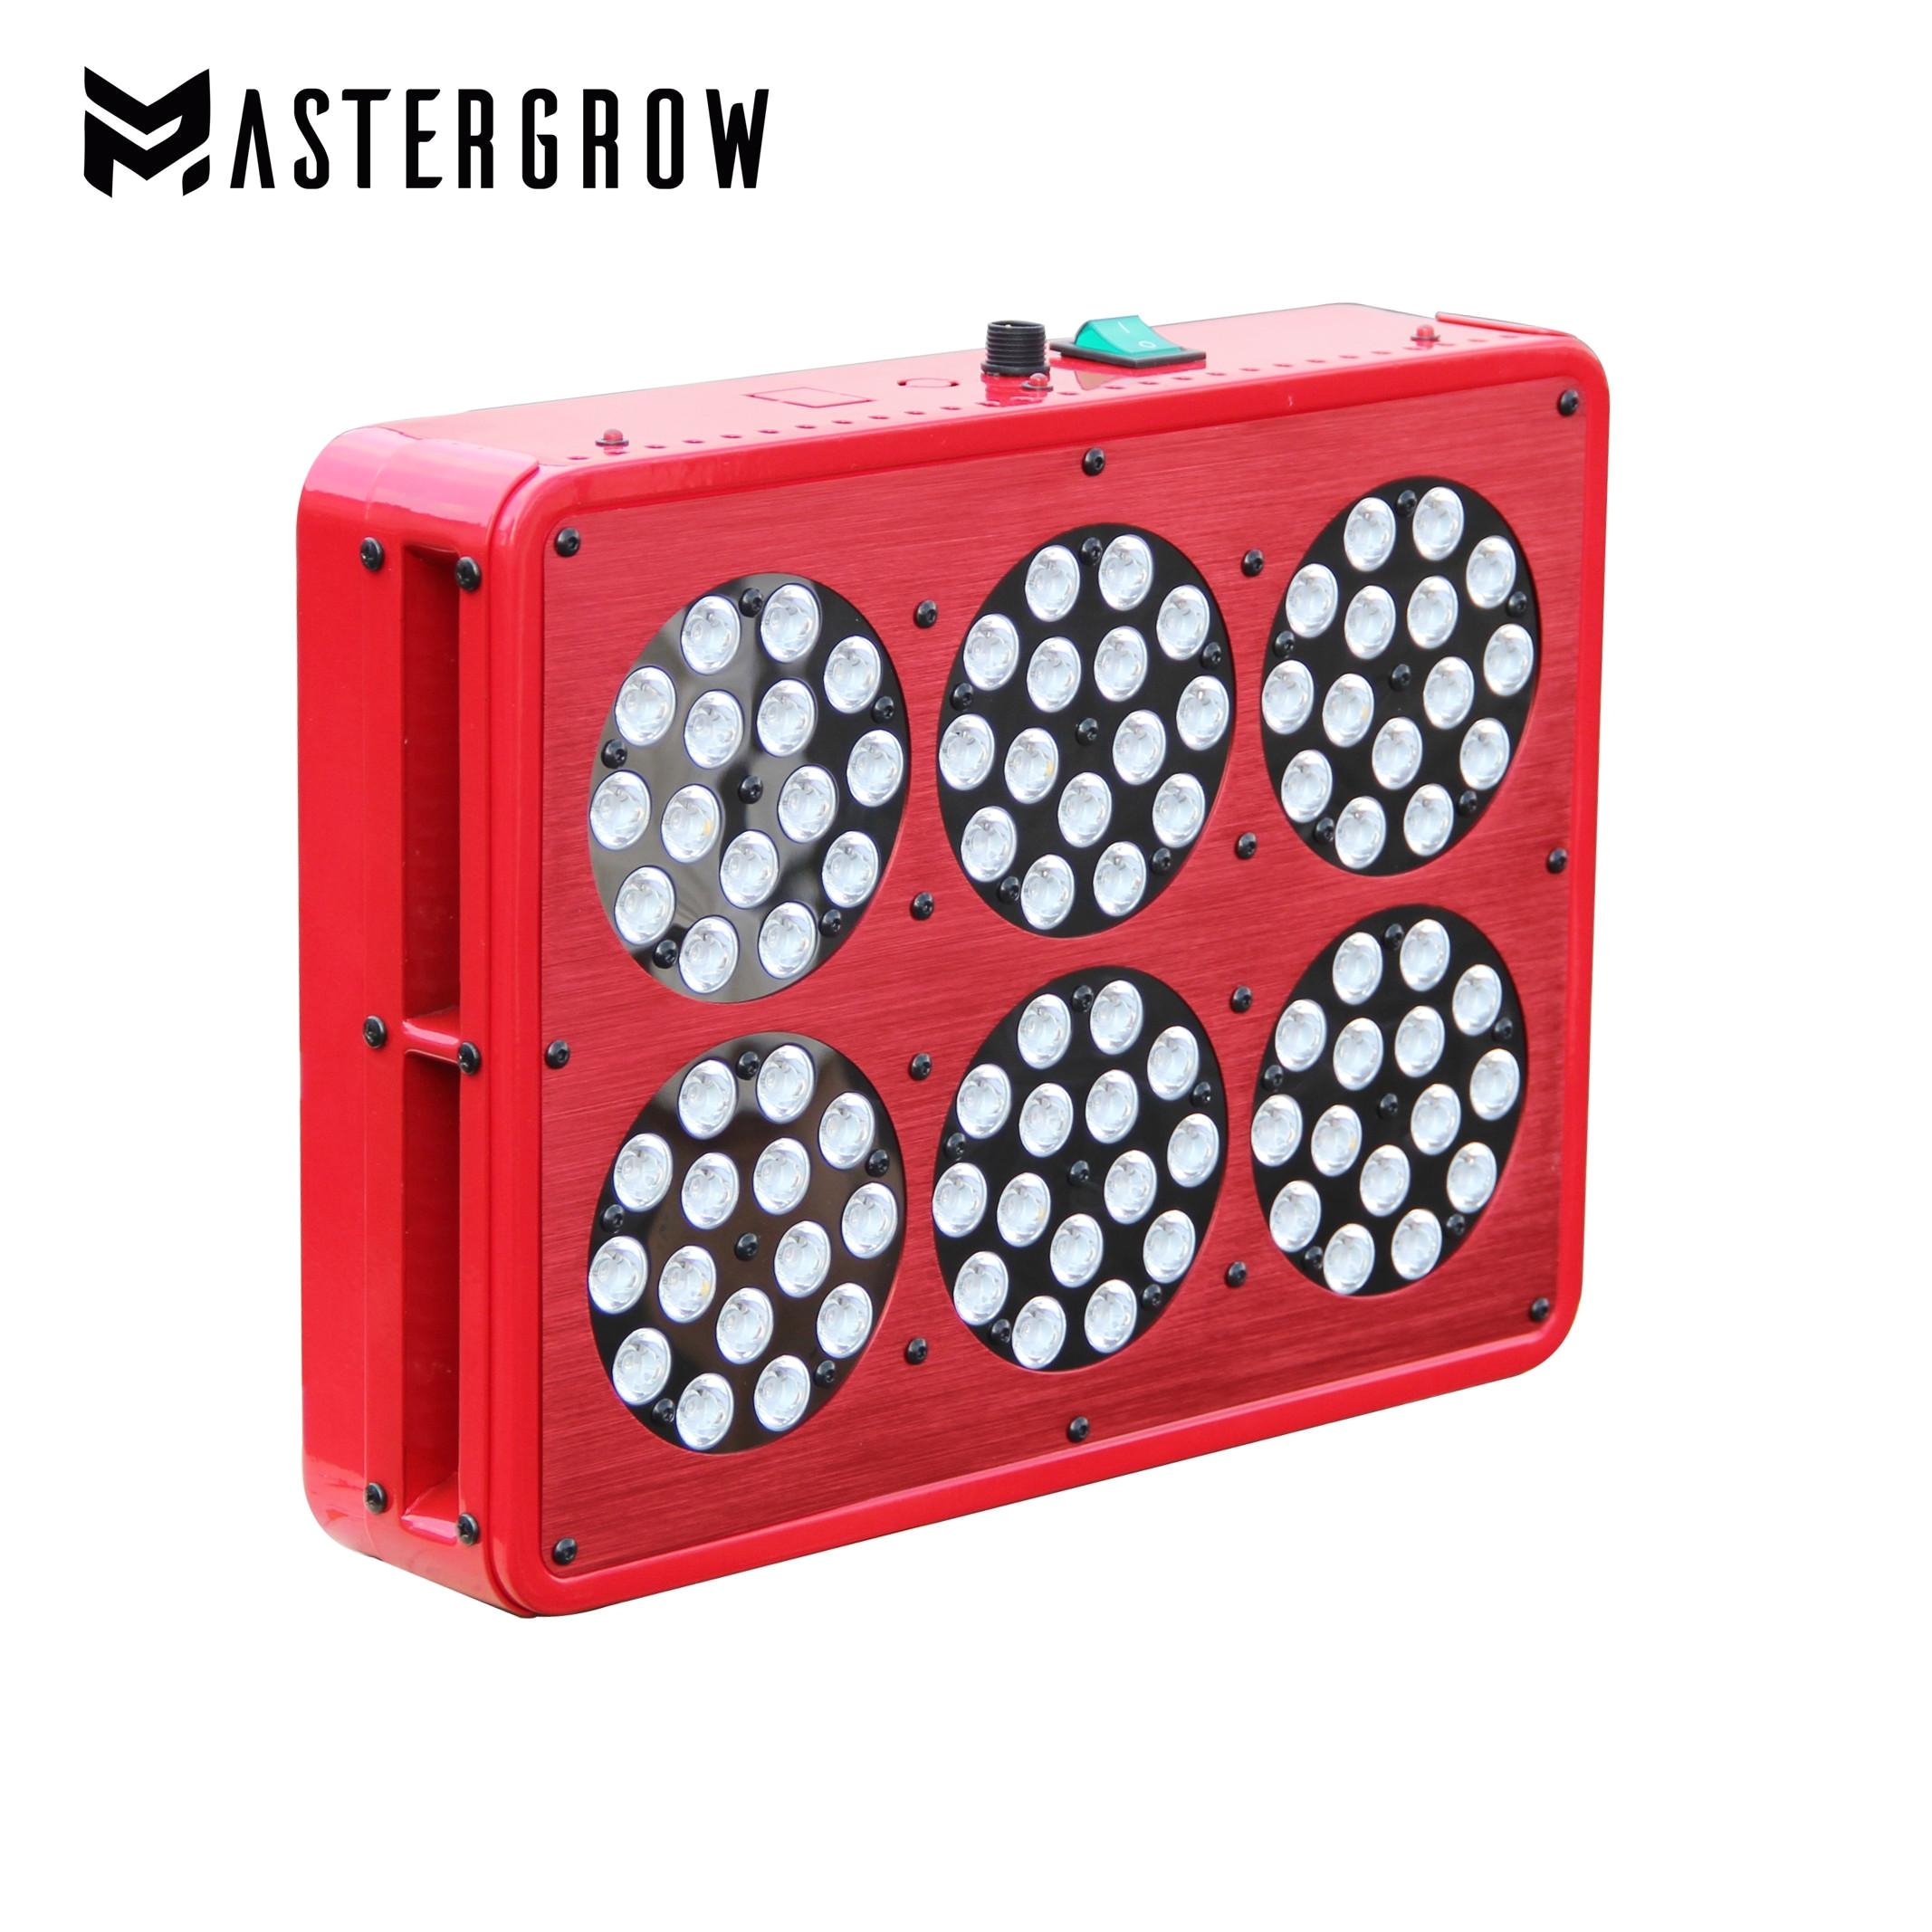 apollo 6 full spectrum 450w led grow light 10bands with exclusive 5w leds for flower vegetative greenhouse indoor plants hydroponic system apollo led grow